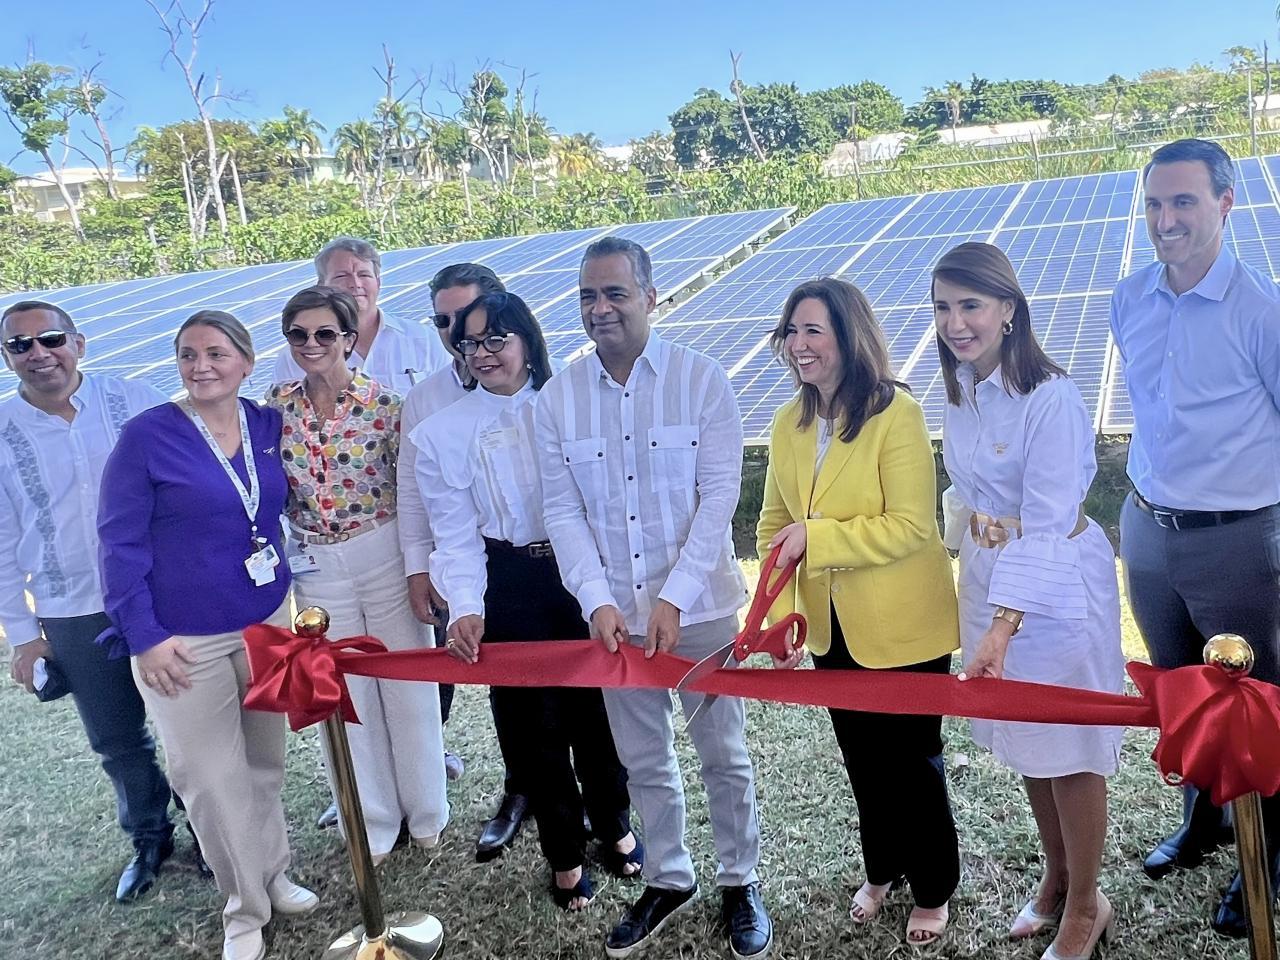 From the left: Jesus Mendez, Regional Director, Carnival Corp.; Sharon Mei, Amber Cove General Manager; Vicky Rey, VP, Gov. Affairs, Carnival Corp.; Jeff Rannik, Pres., Rannik Group; Alejandro Campos, Pres. of the Board, Dominican Port Authority; Elba Tineo, Municipal Director, Maimon; Joel Santos Echevarría, Minister of the Presidency, Dominican Republic; Christine Duffy, Pres., Carnival Cruise Line; Claritza Rochtte, Governor, Puerto Plata; Juan Fernández, VP, Strategic Operations, Carnival Corp.